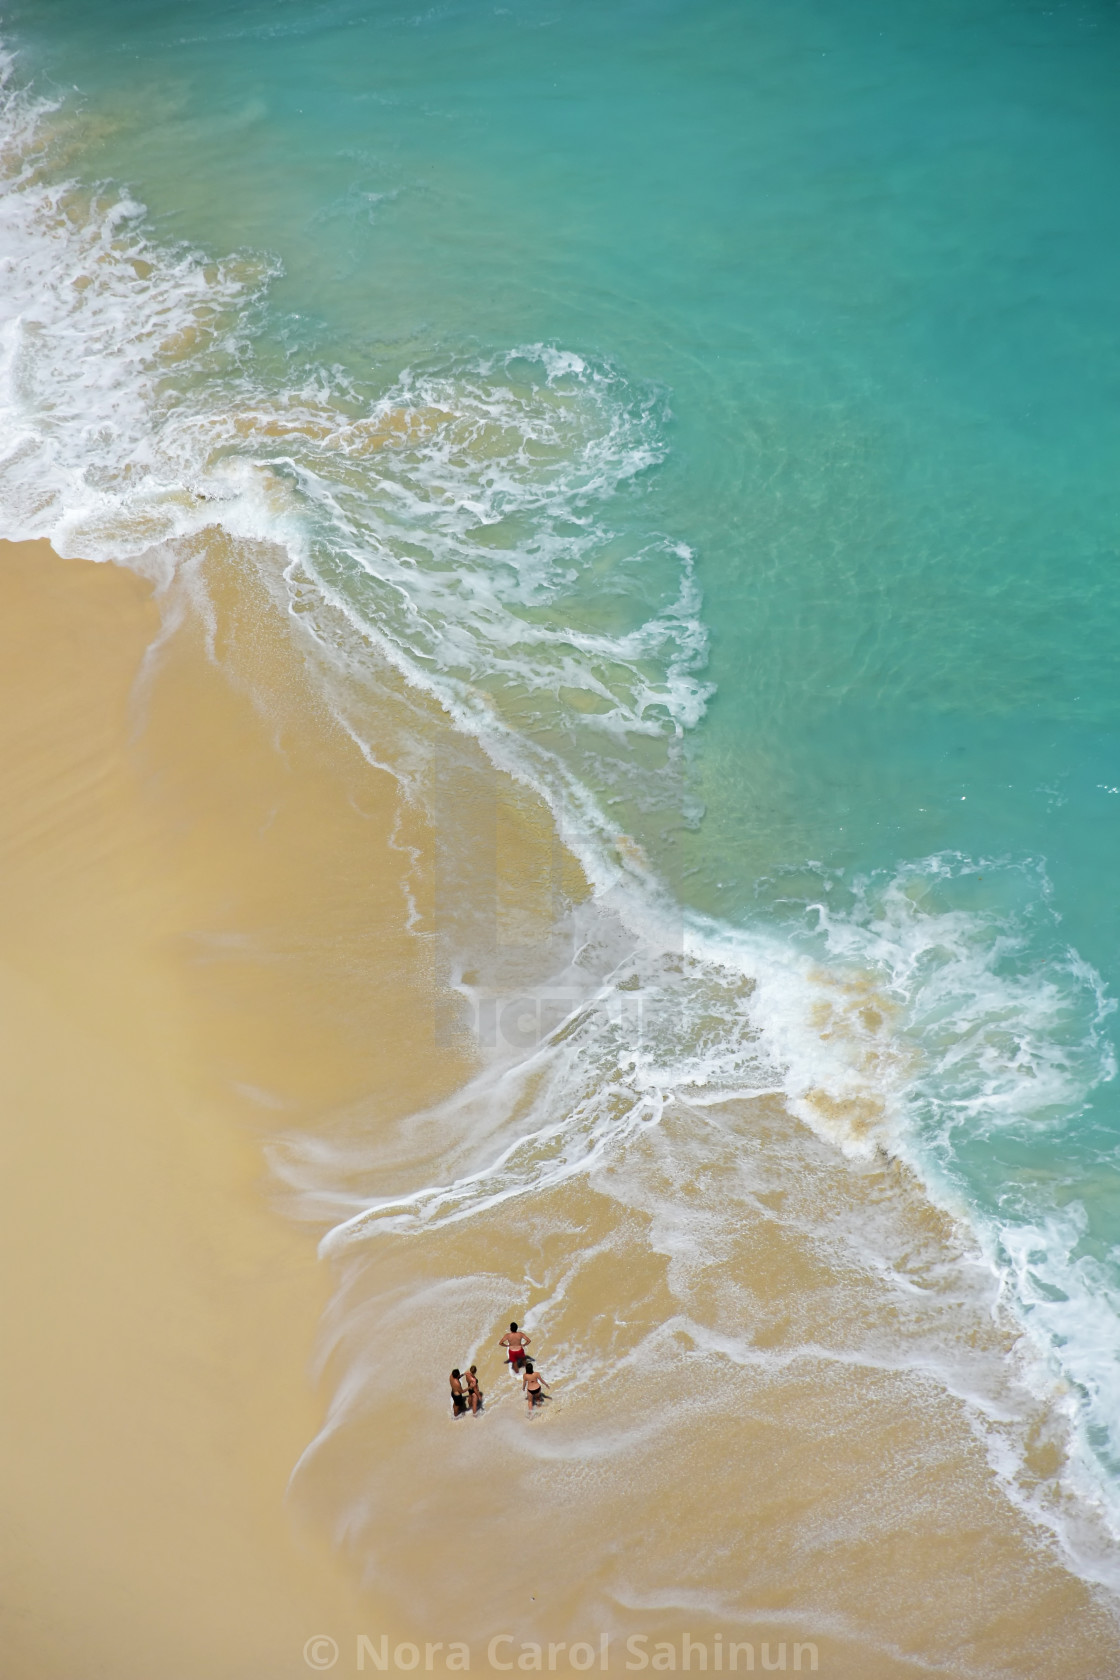 Aerial view of ocean waves and people, download or print for £15.50